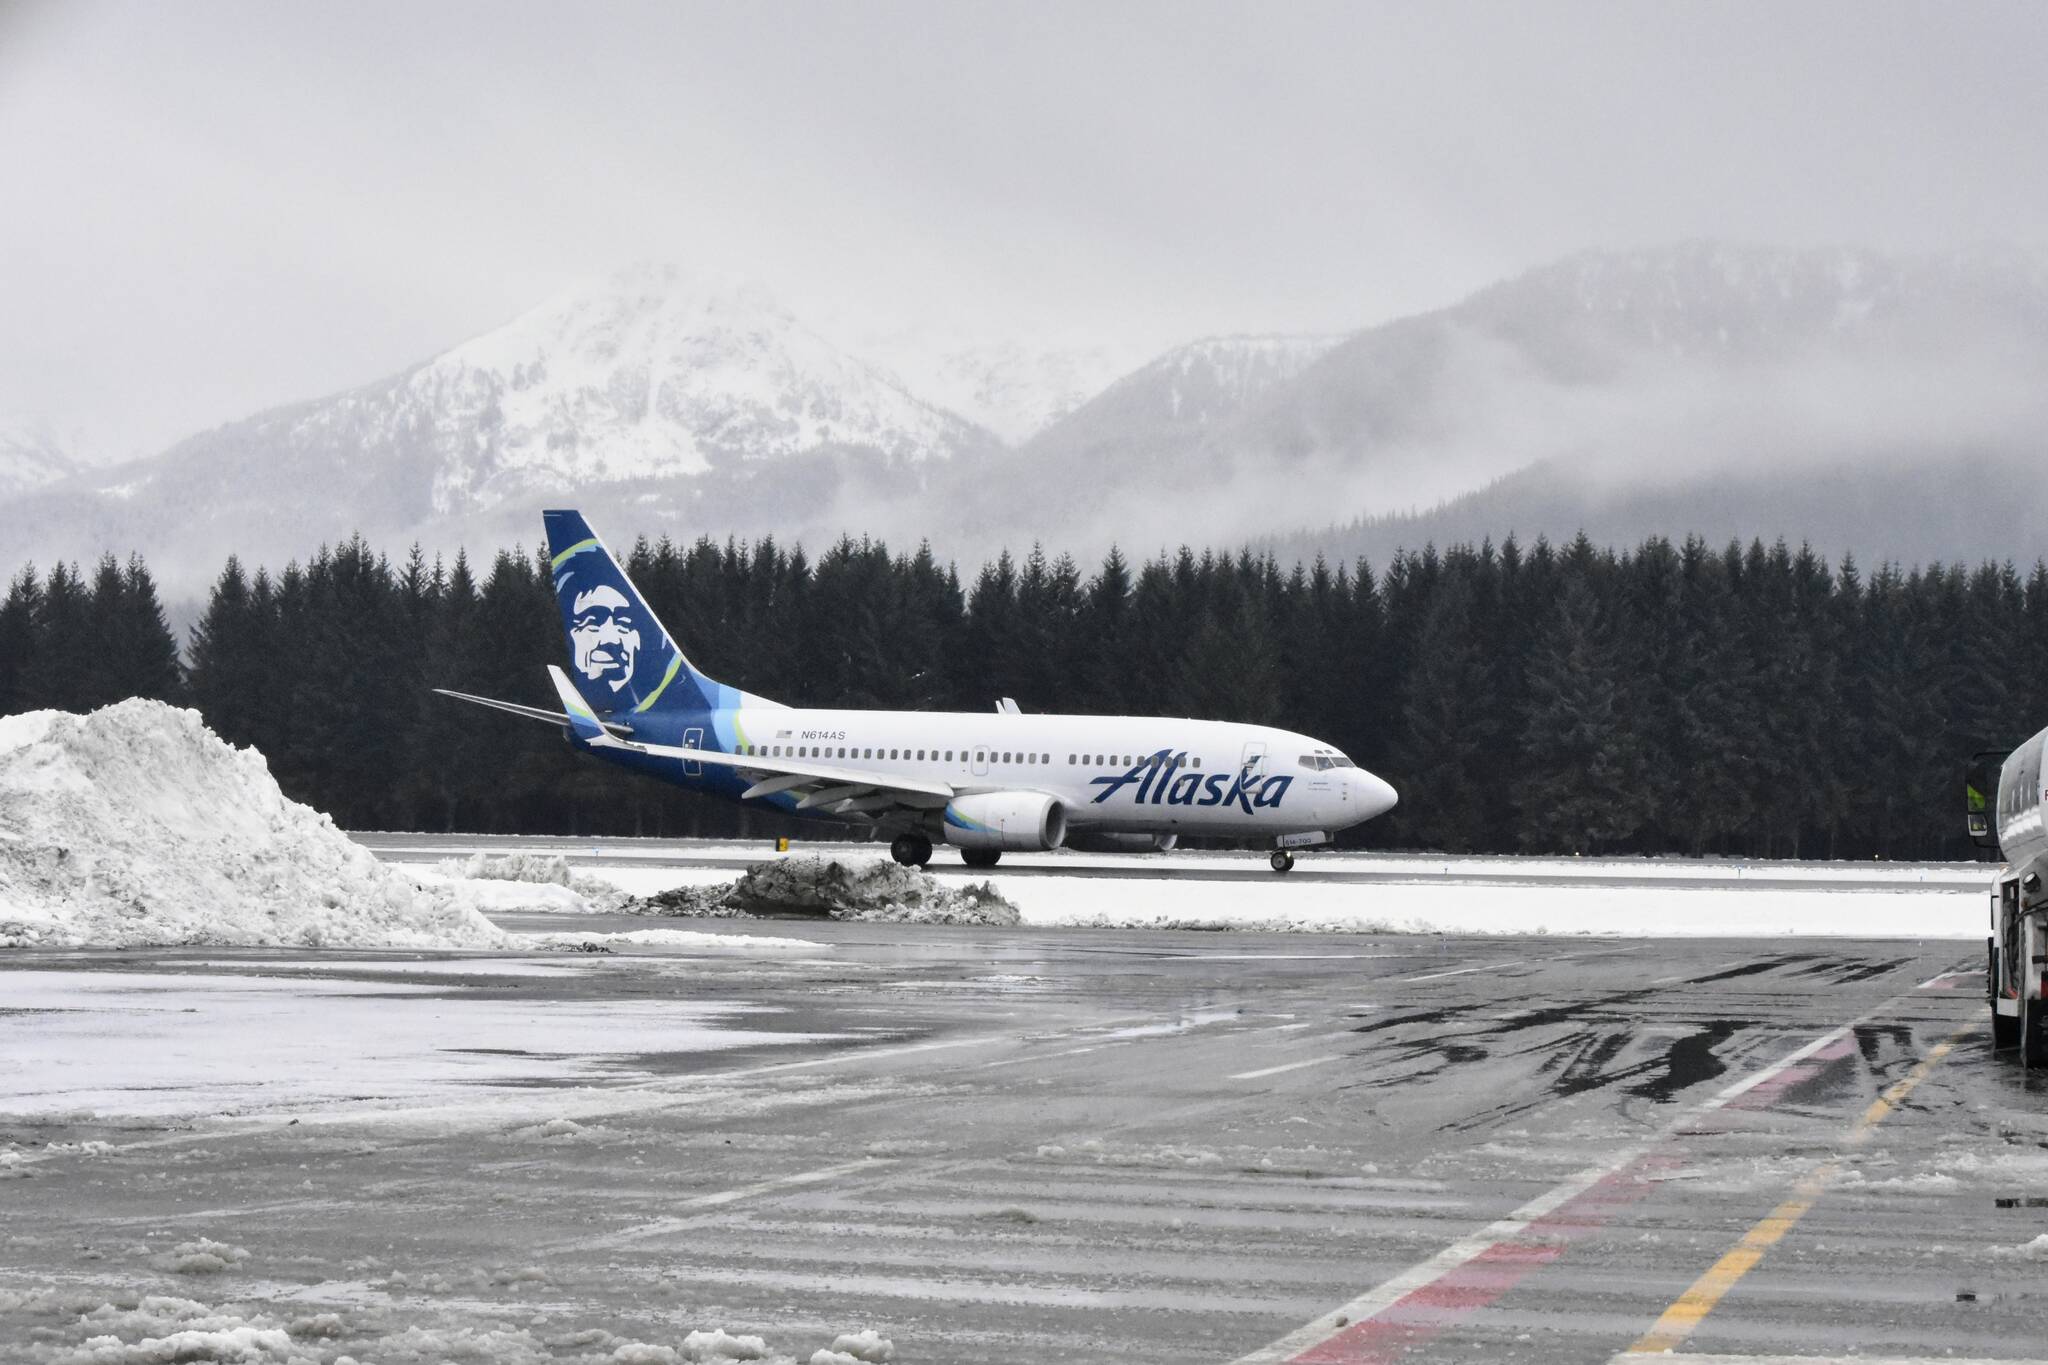 An Alaska Airlines flight lands at the Juneau International Airport on Monday, Nov. 22, 2021, amid a day of rain and snow. The National Weather Services issued a winter storm warning for Tuesday to Thursday, which covers “Black Wednesday,” the busiest travel day of the year. (Peter Segall / Juneau Empire)